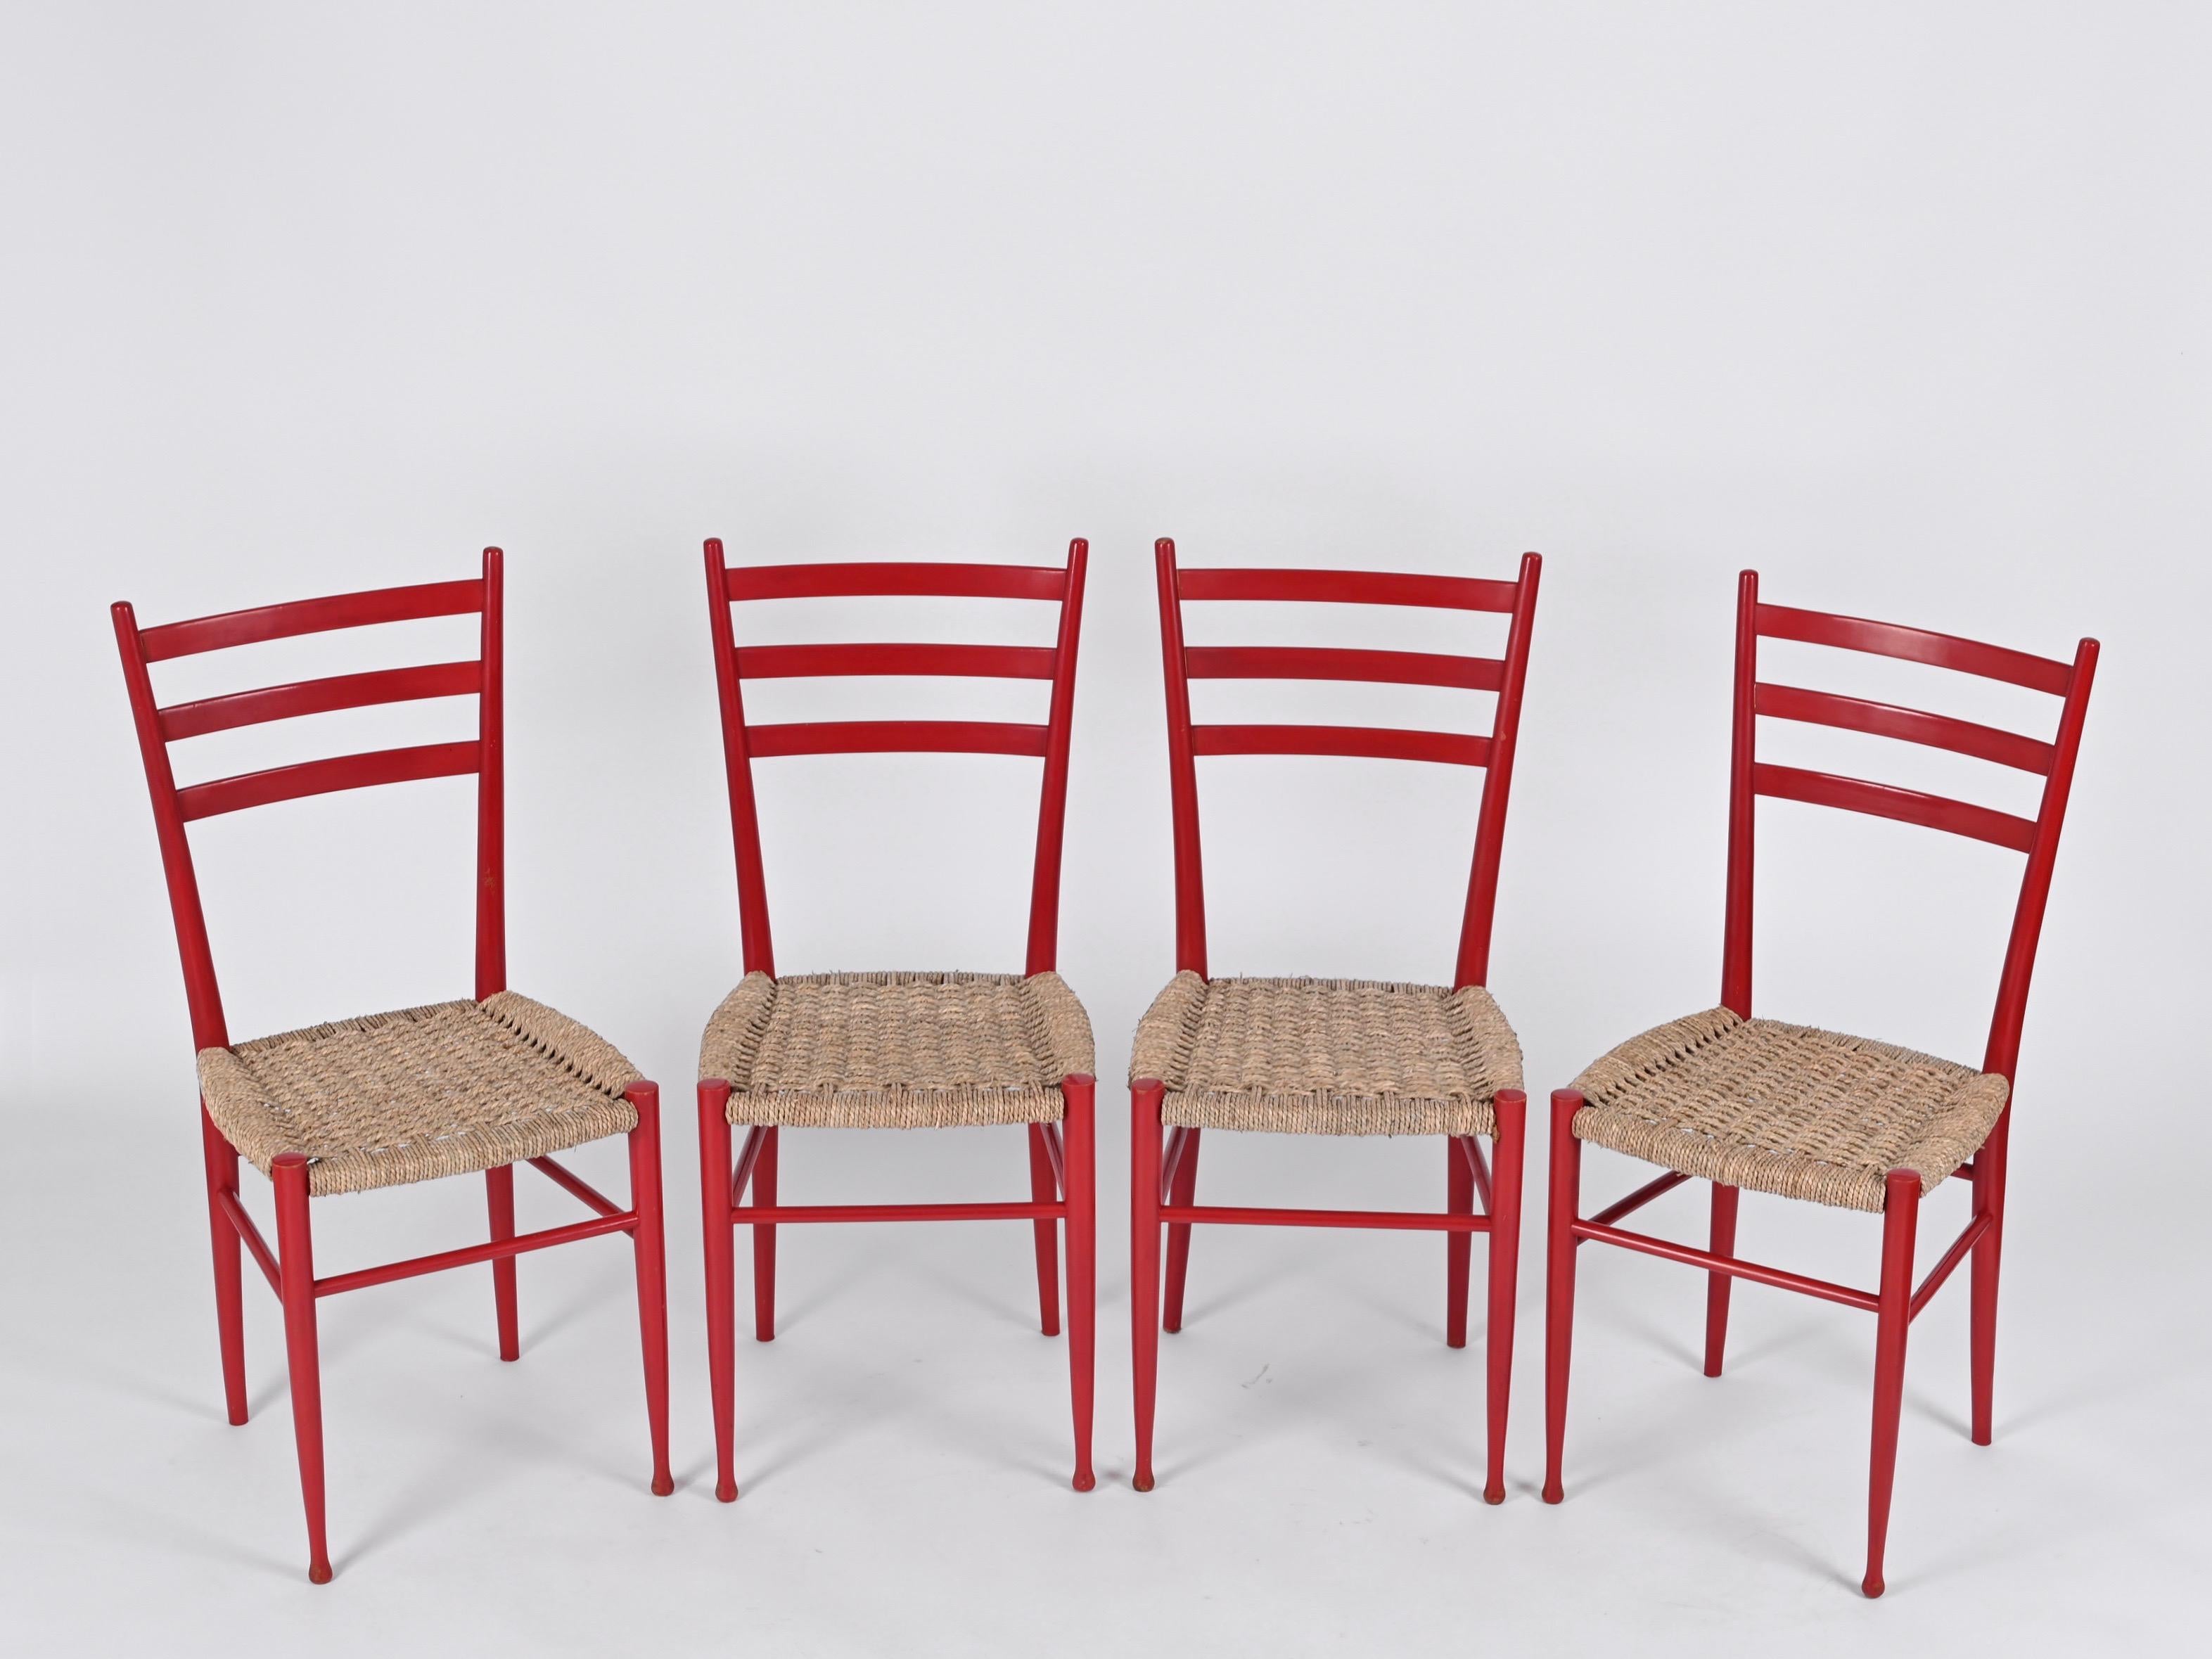 Set of 4 Chiavarine Chairs in Red Stained Beech and Bamboo Rope, Italy 1950s For Sale 10